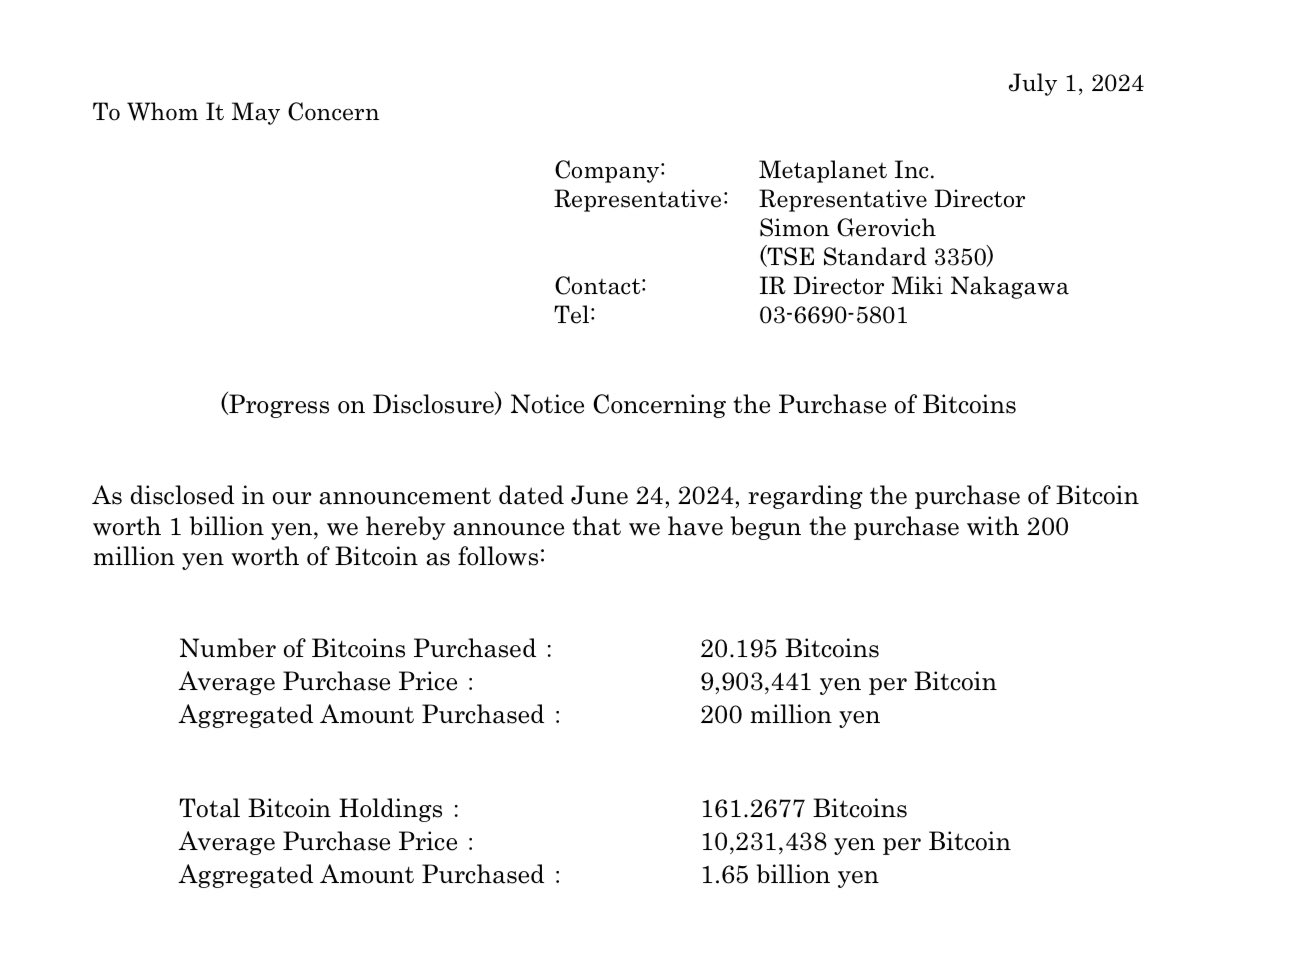 “Asian MicroStrategy” Metaplanet Buys Additional Bitcoin Worth $1.2M